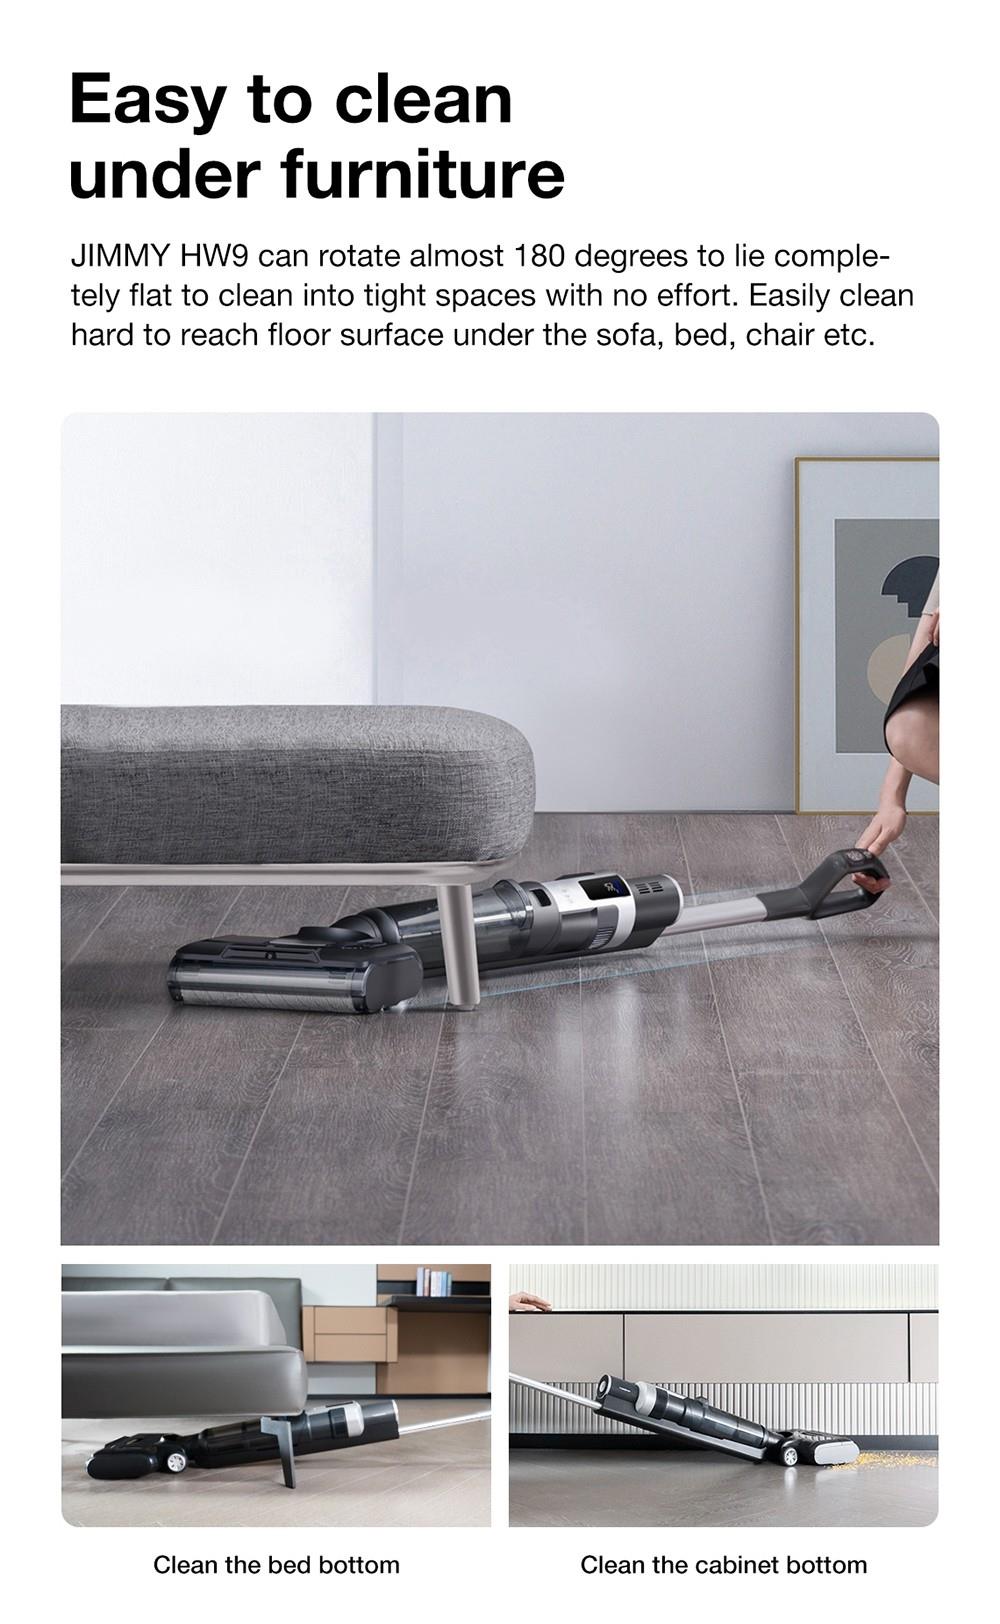 JIMMY HW9 Cordless Wet and Dry Vacuum Cleaner, Self-Cleaning, 400ml Dust Water Tank, Waterproof Brushless, LED Display